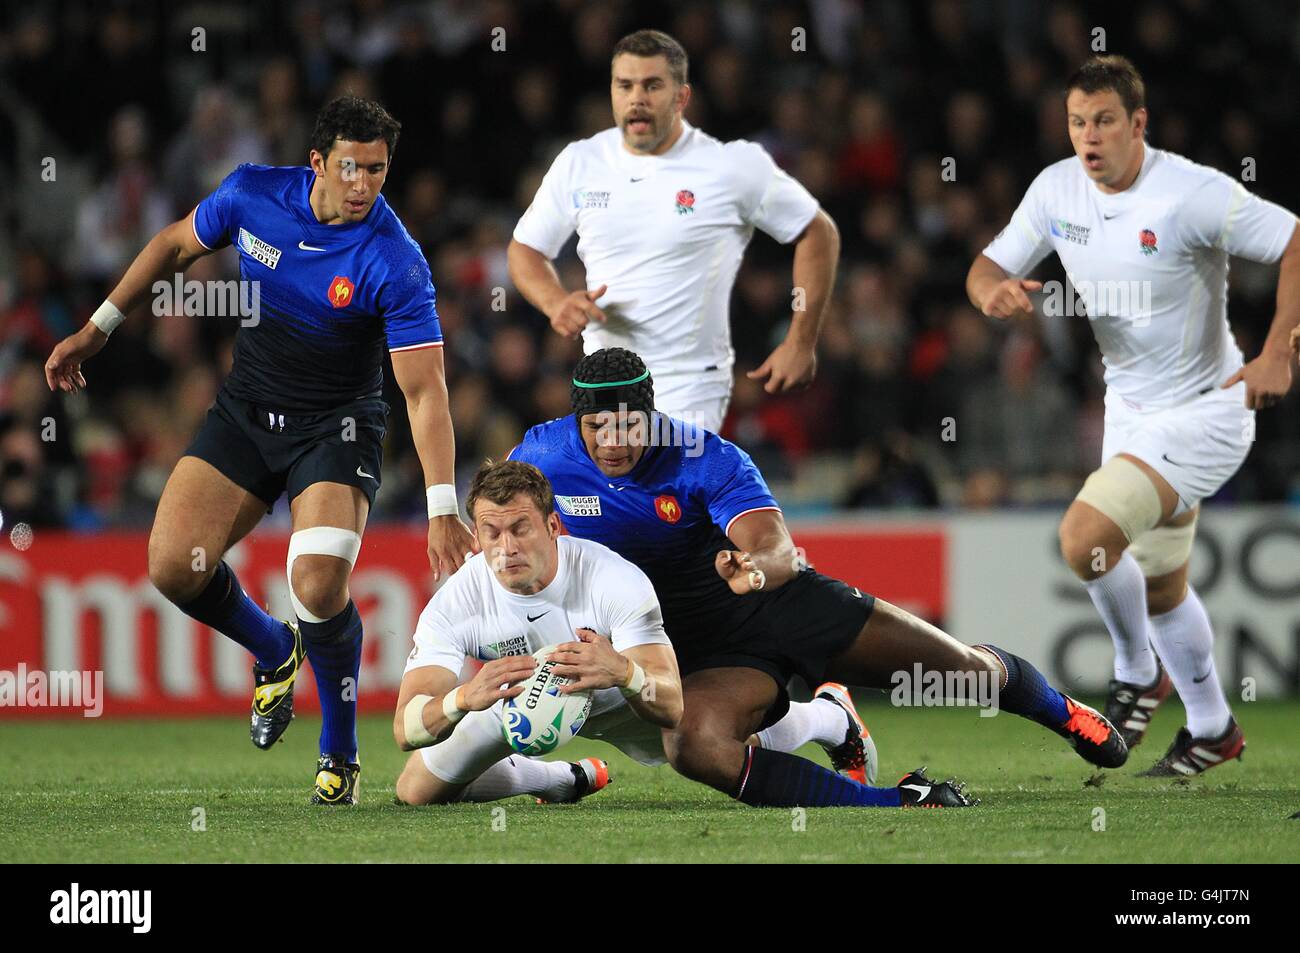 Rugby Union - Rugby World Cup 2011 - Quarter Final - England v France - Eden Park Stock Photo